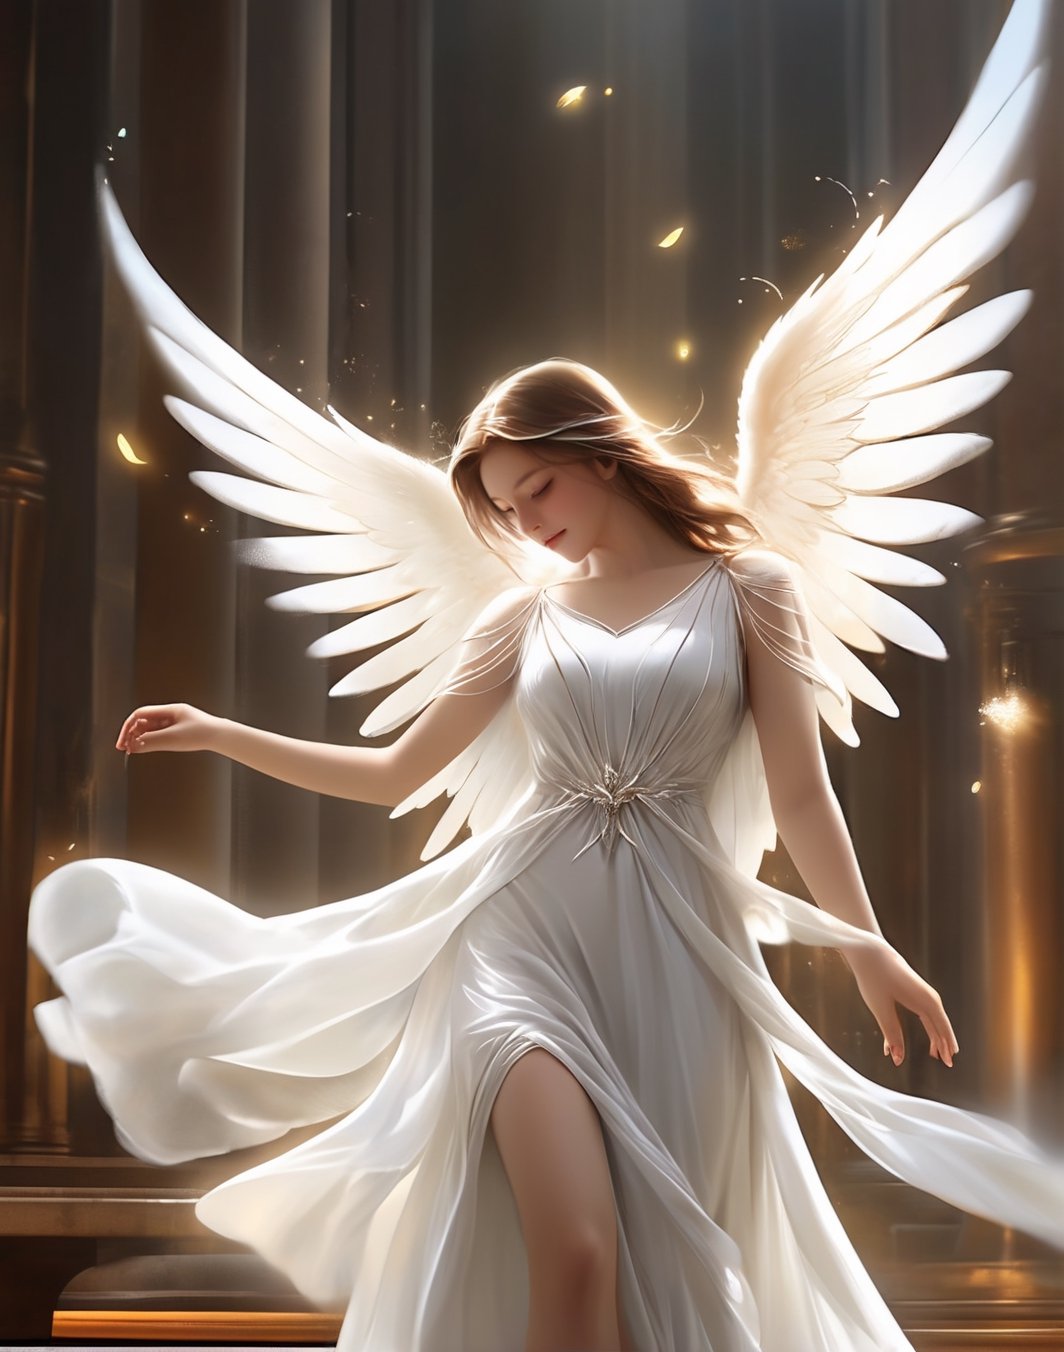 a woman in a white dress is dancing, by Anne Stokes, biblically acurate angel, tron angel, angelic light, angels in white gauze dresses, angel spirit guide, of an beautiful angel girl, flying angels, infinite angelic wings, angelic wings, tall female angel, by Nele Zirnite, wings made of light, angel, very beautiful fantasy art